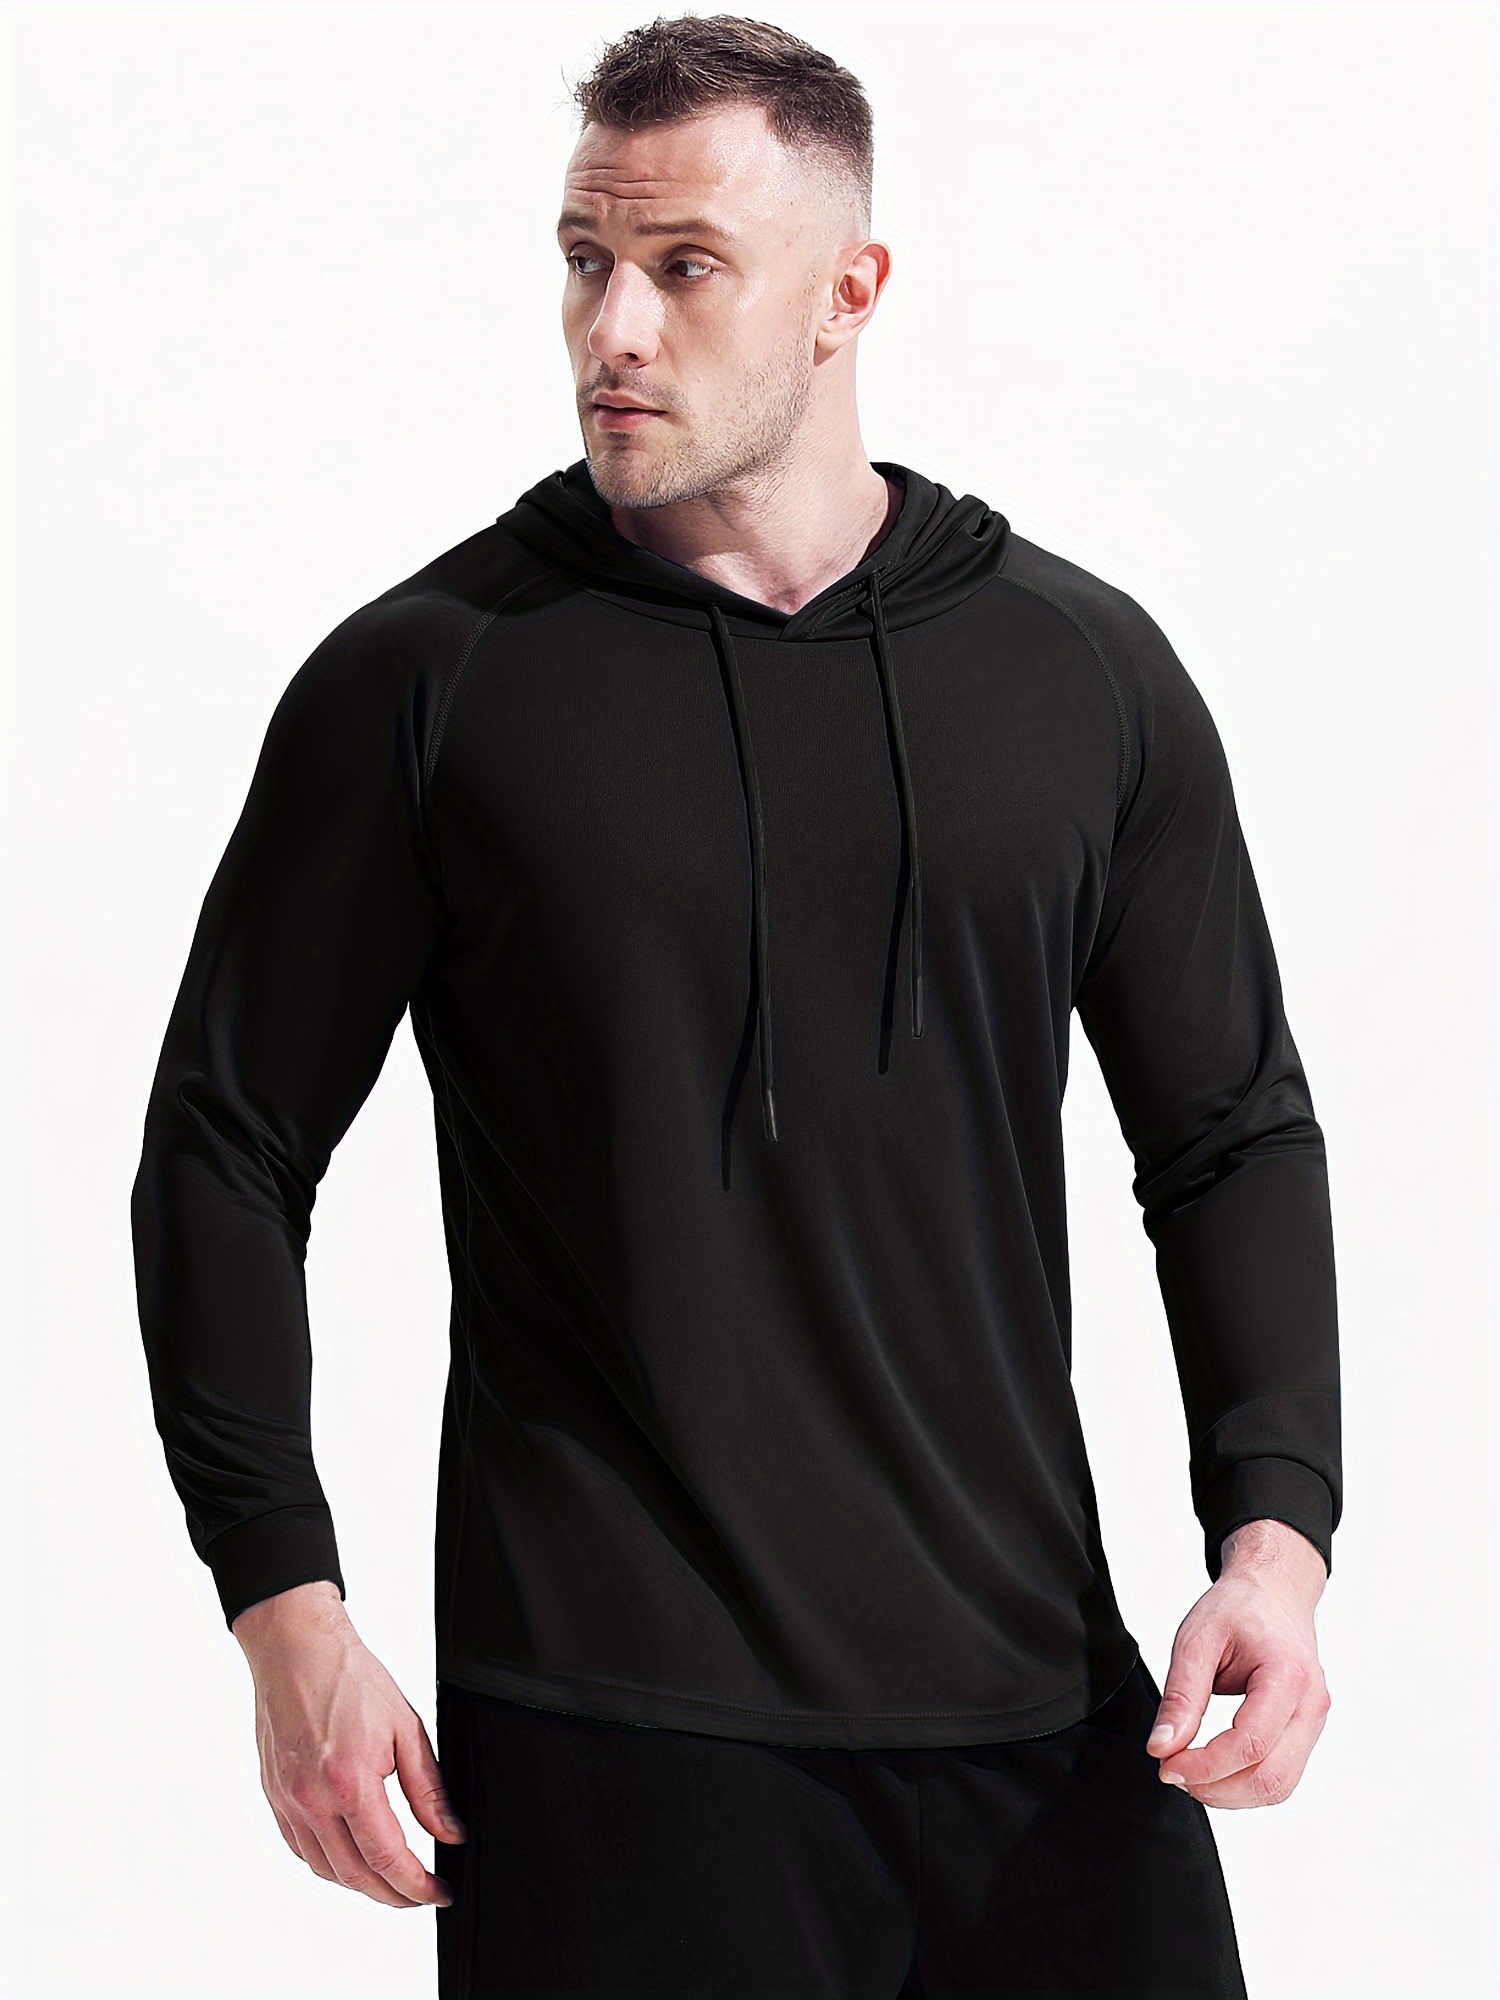  Men Long Sleeve Compression Running Shirts Sports Hoodies Dry  Fit Fitness Top Black S : Clothing, Shoes & Jewelry